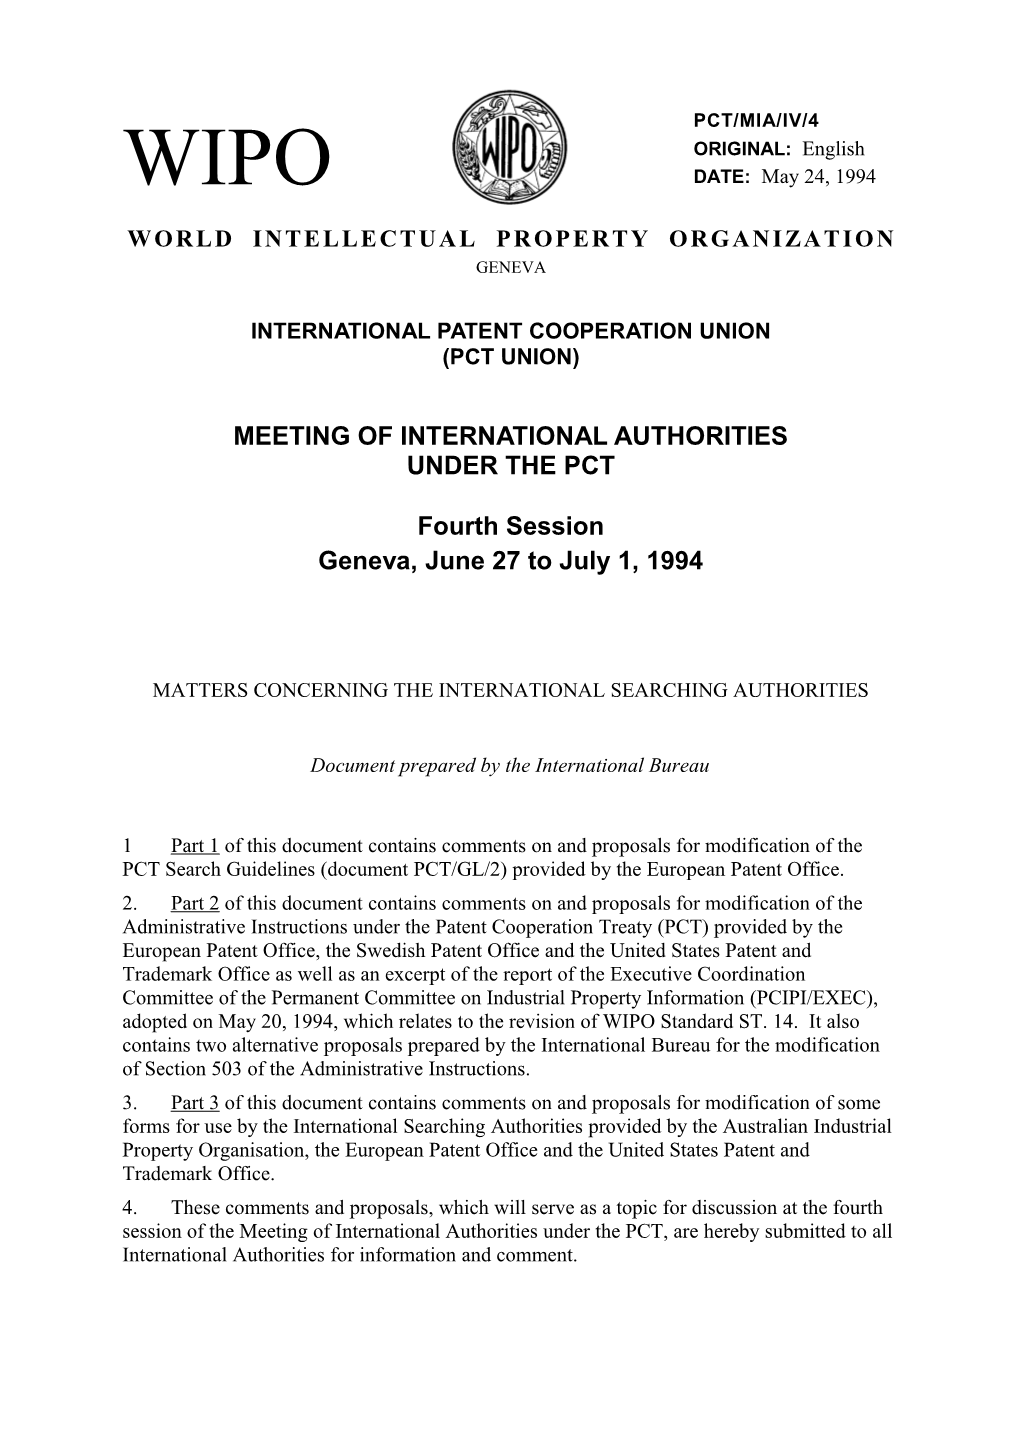 PCT/MIA/IV/4: Matters Concerning the International Searching Authorities